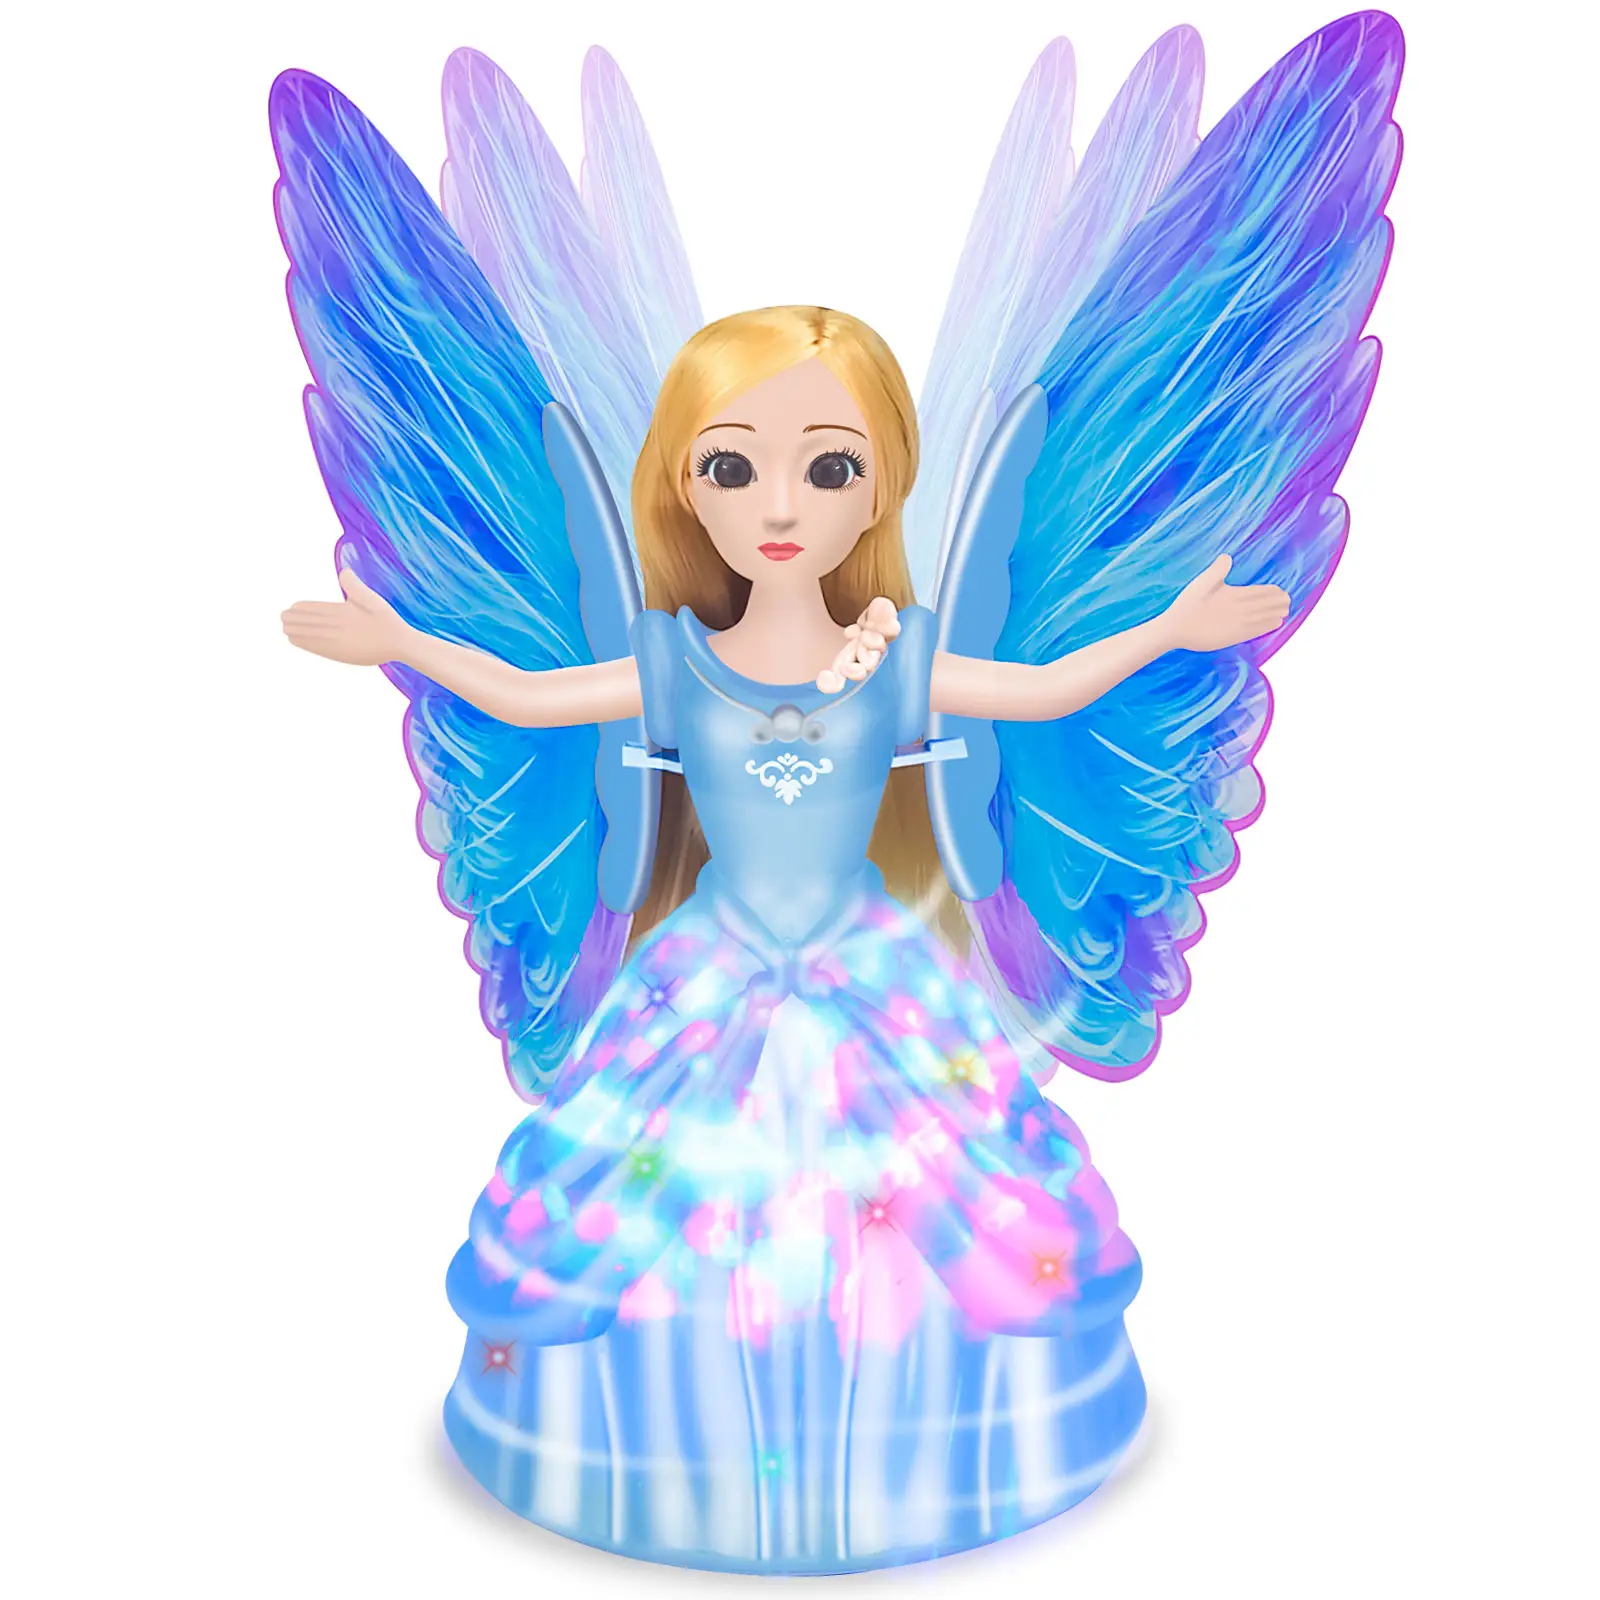 Hot sales Blue Princess doll children's electric toy dance fairy lights princess light toys for girls